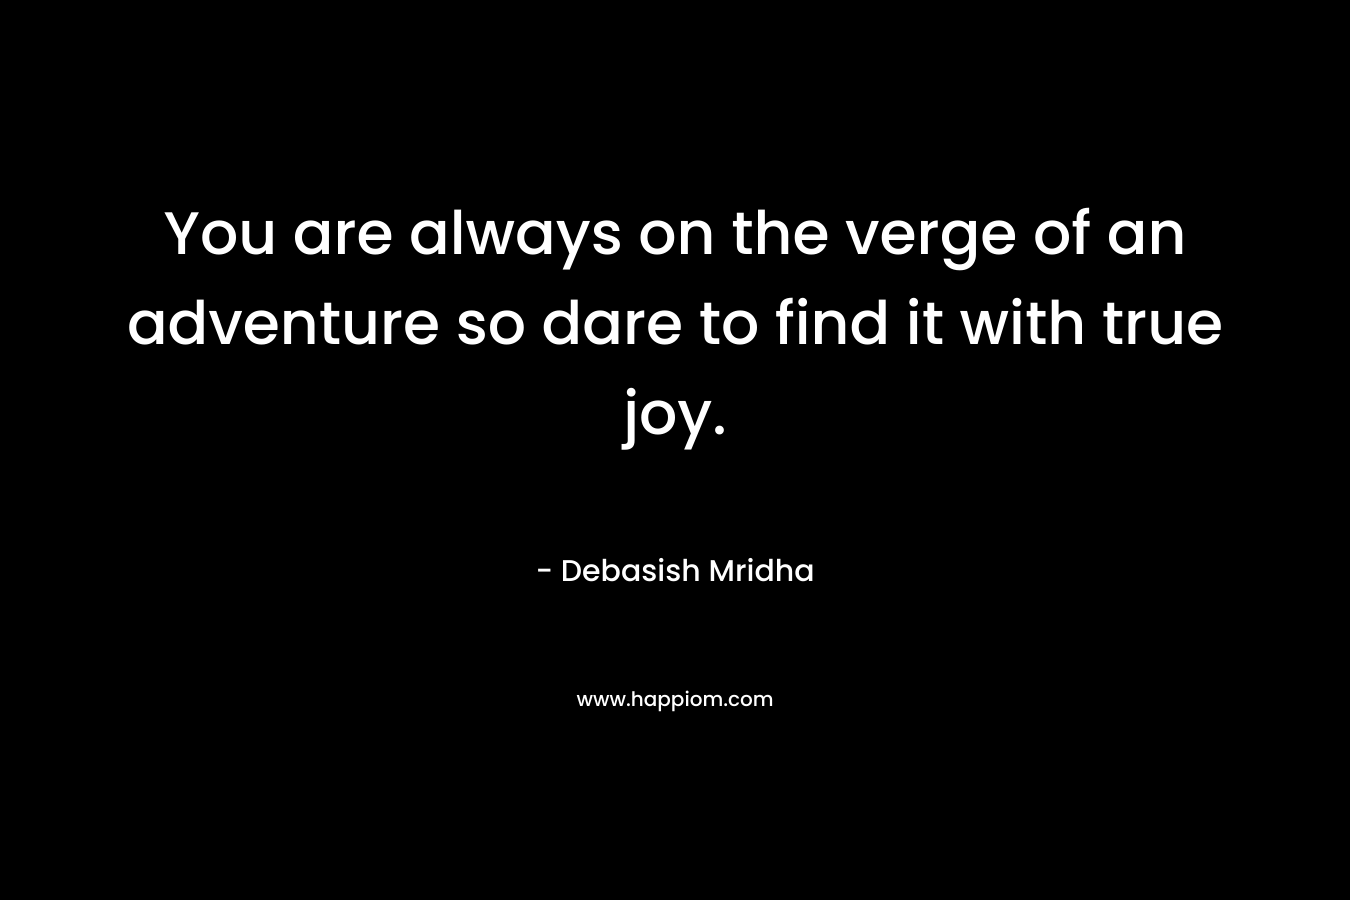 You are always on the verge of an adventure so dare to find it with true joy.